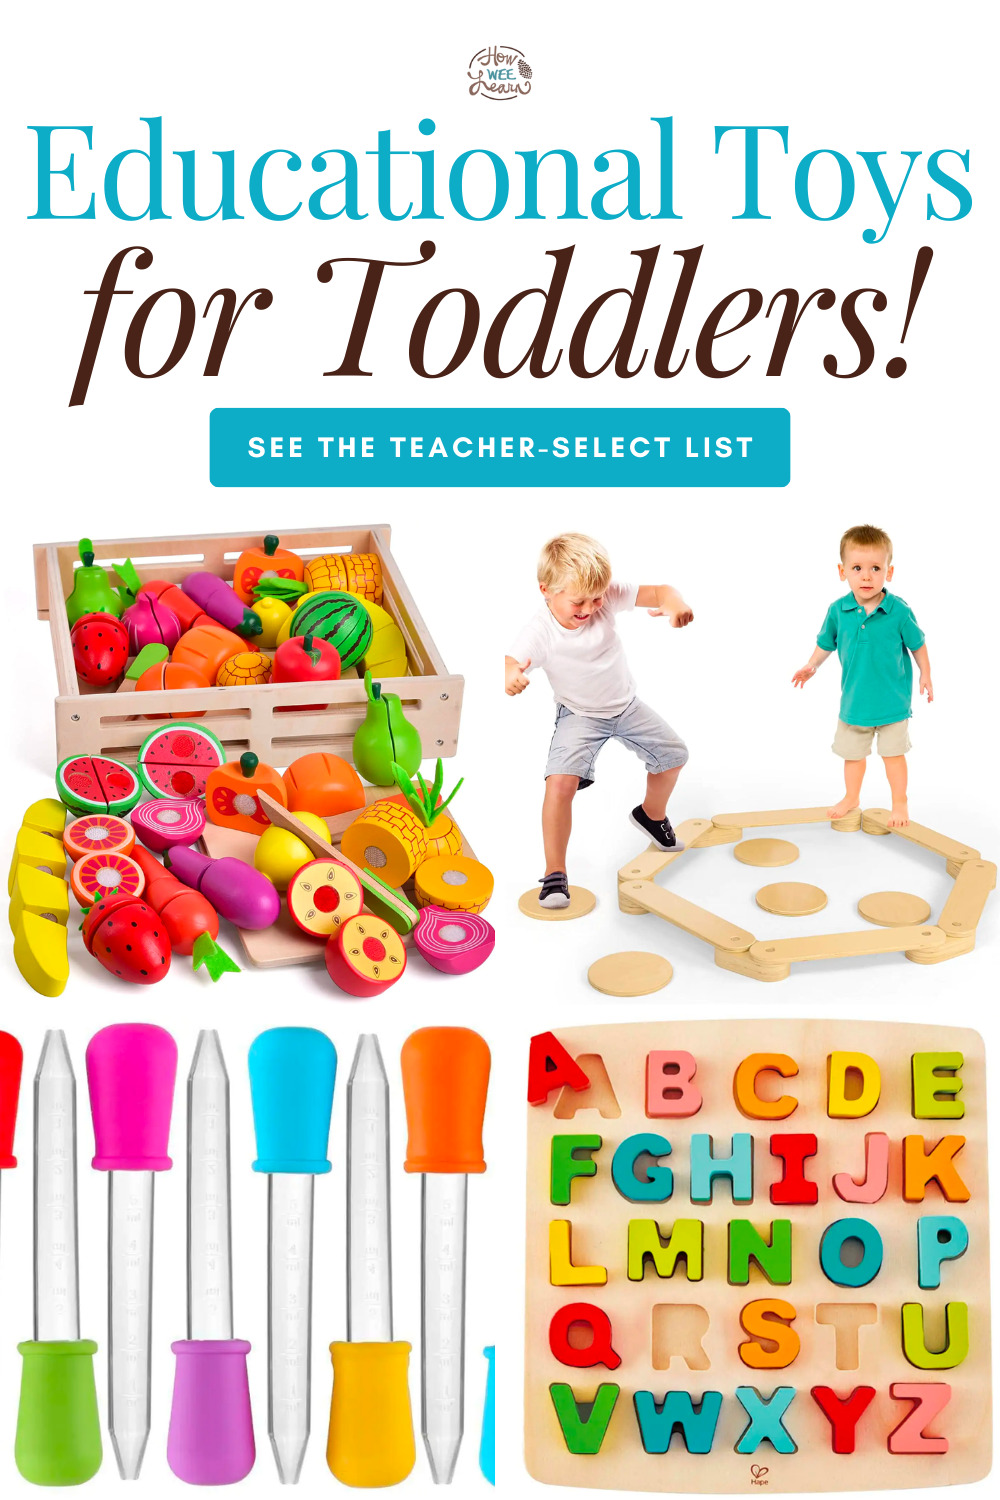 Educational Toys for Toddlers: See the Teacher-Selected List